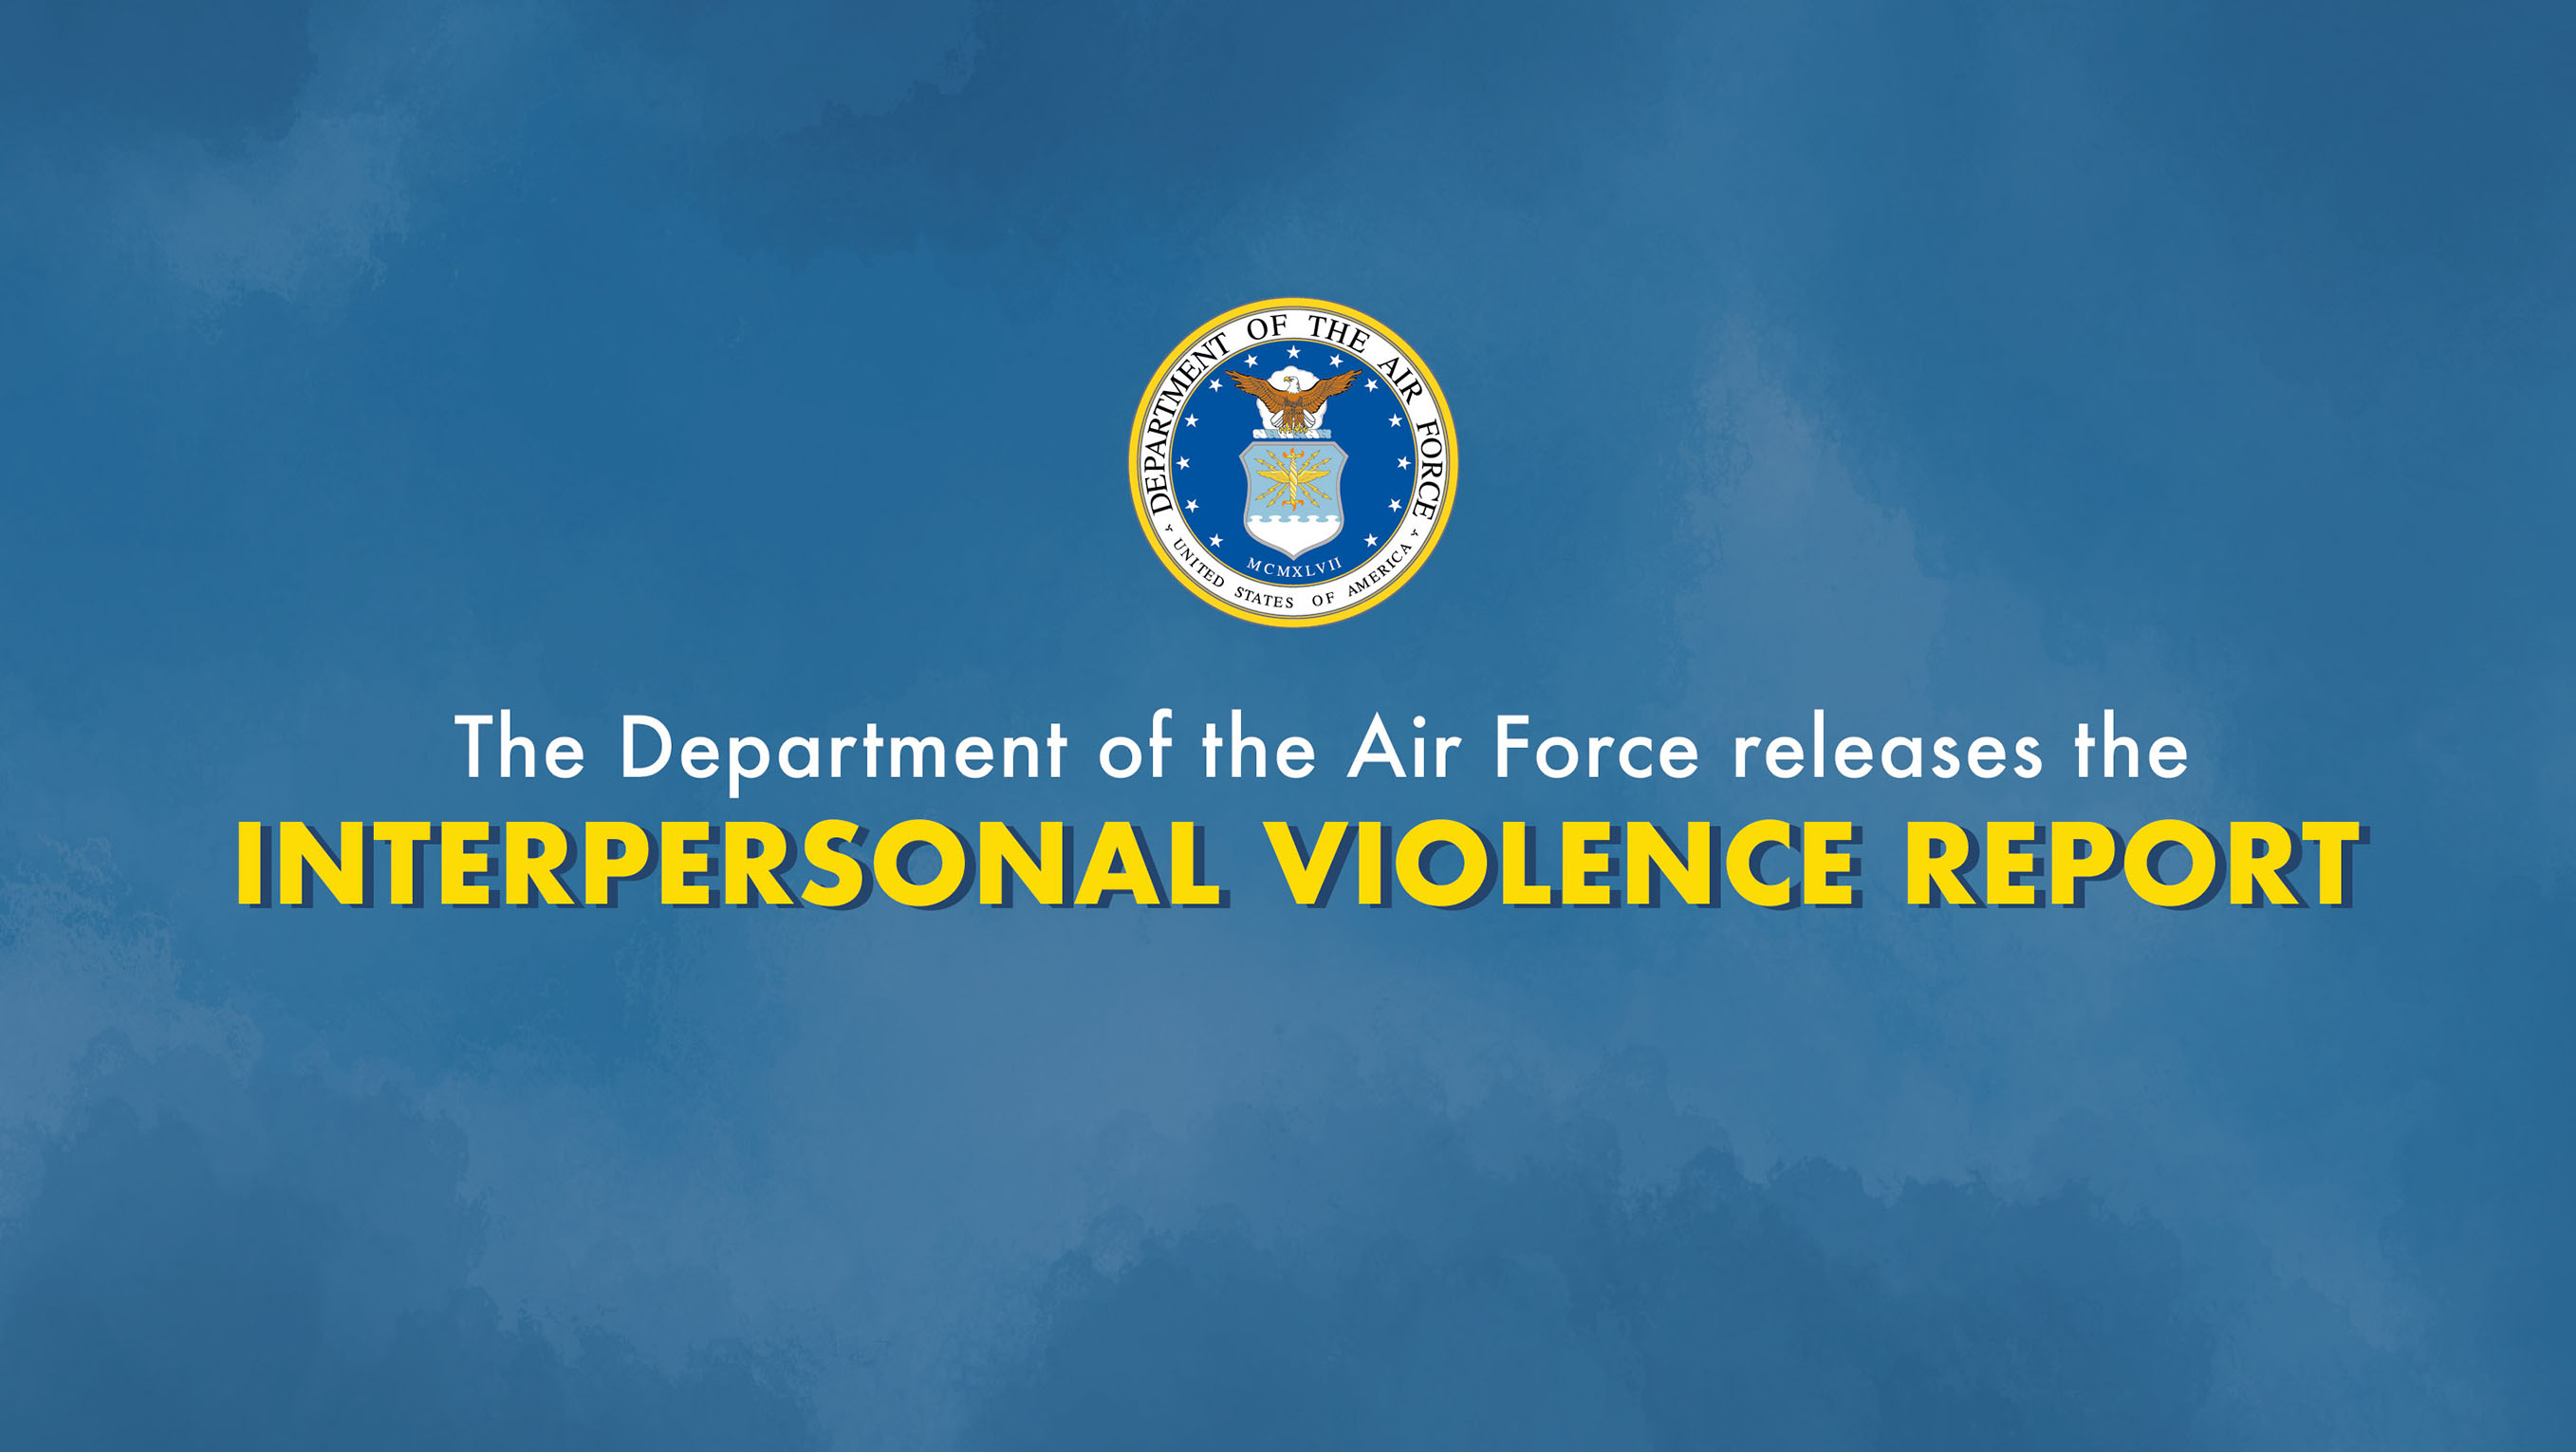 U.S. Air Force Interpersonal Violence Report